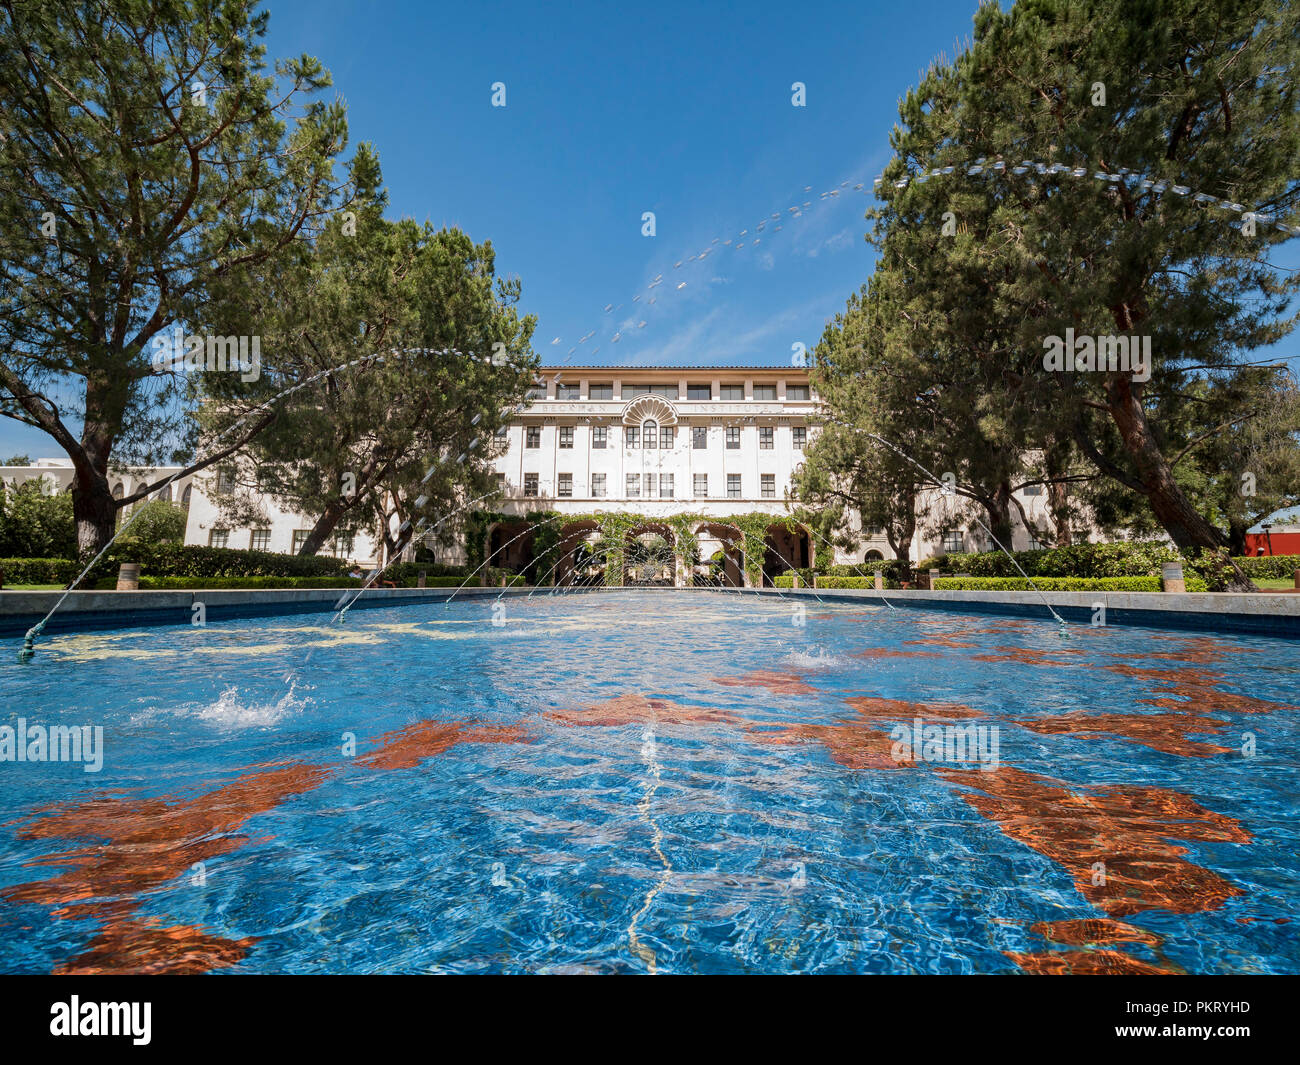 Los Angeles, JUL 21: Exterior view of the Beckman Institute in Caltech on JUL 21, 2018 at Los Angeles, California Stock Photo